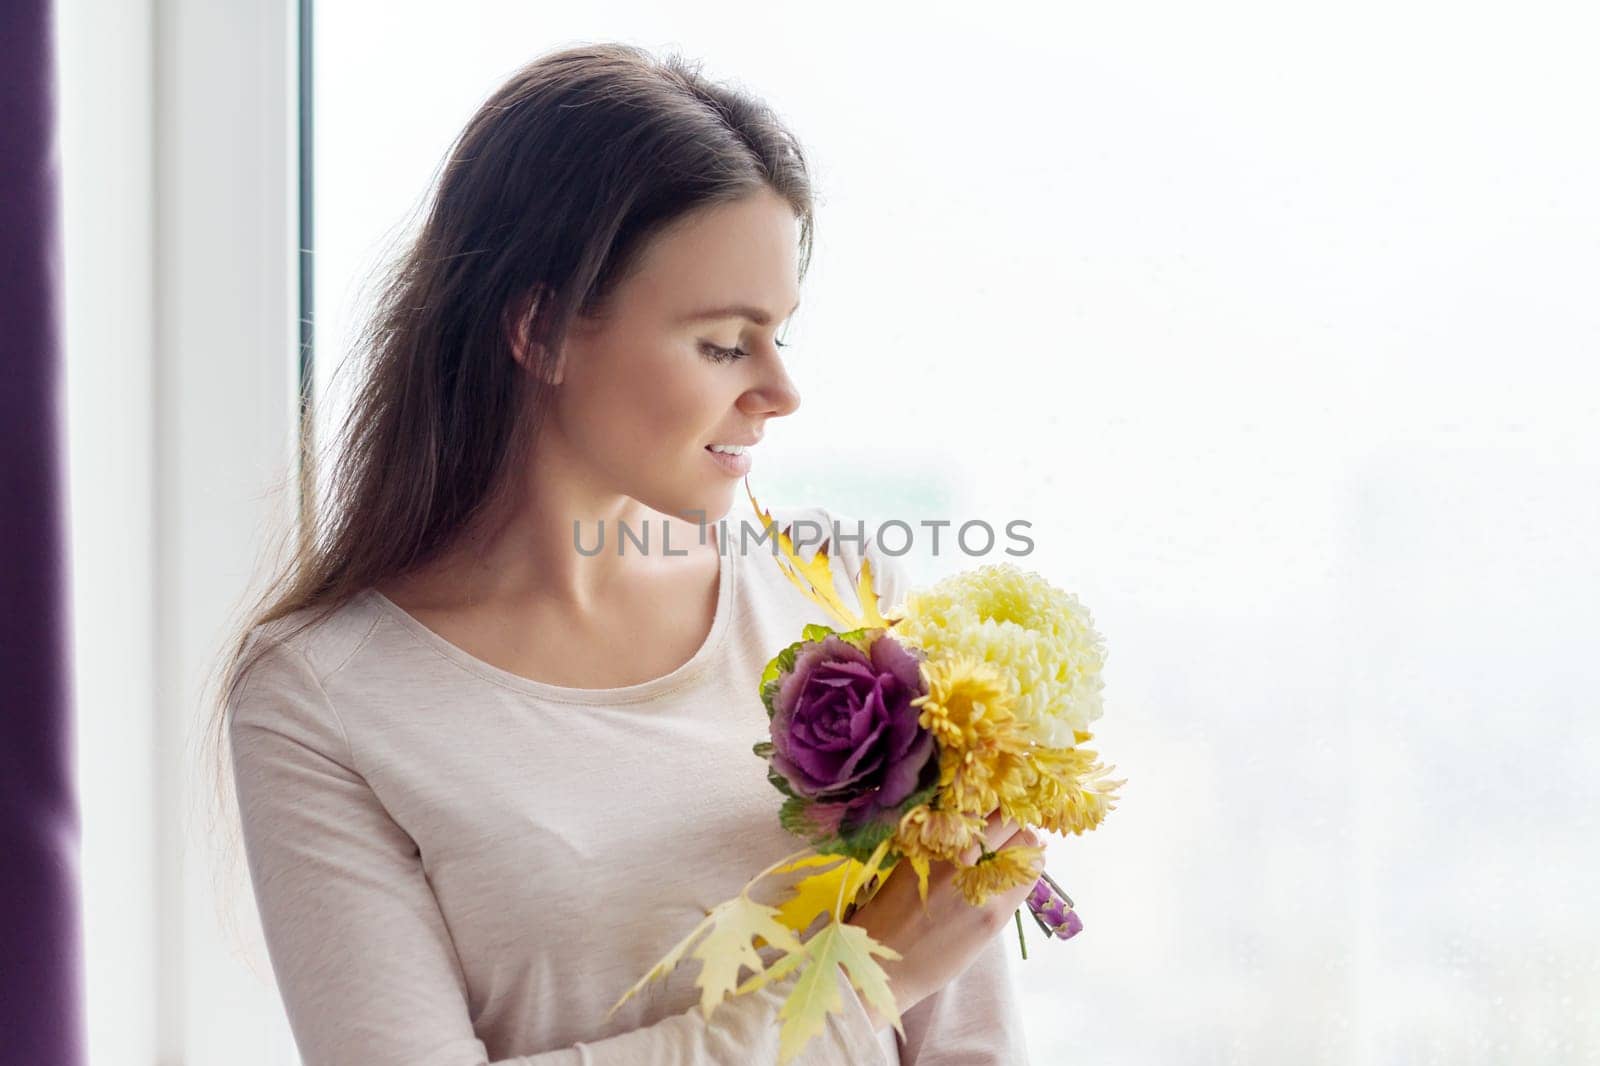 Autumn background, young beautiful woman with bouquet of yellow fallen leaves and autumn flowers looking in cloudy rainy window, copy space for text